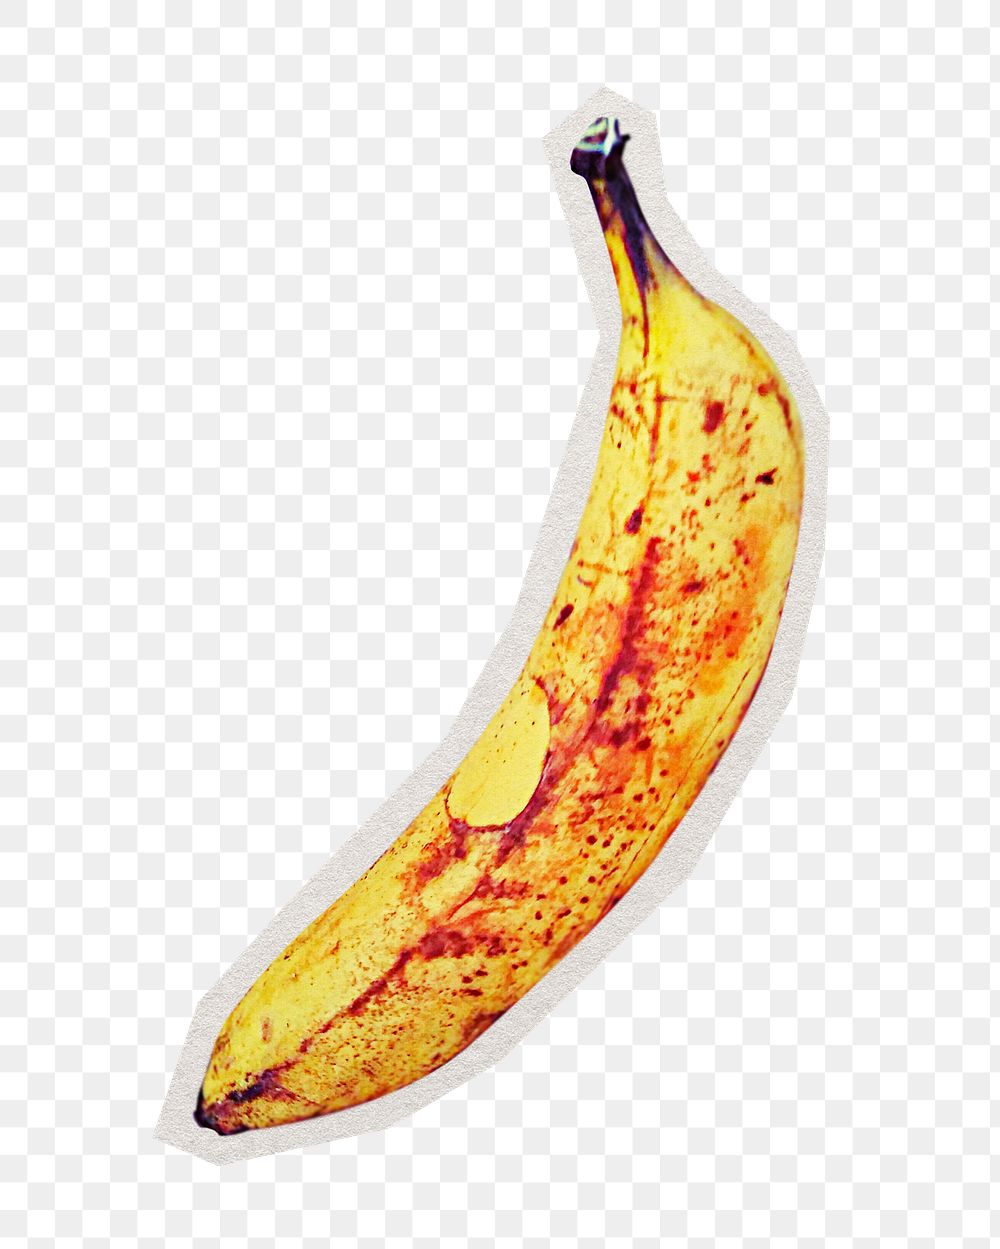 PNG ripe yellow banana sticker with white border, transparent background